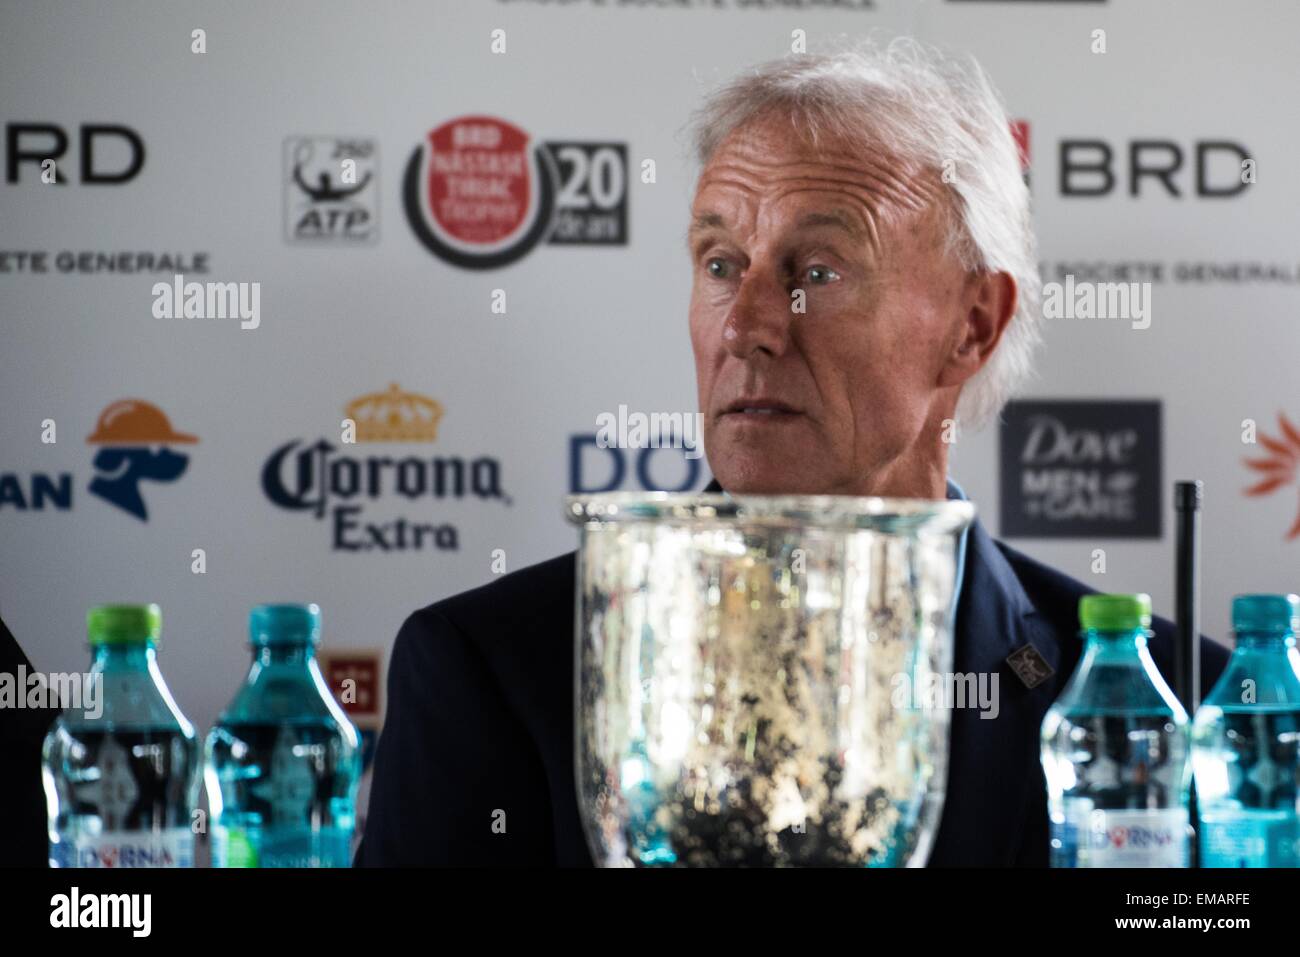 April 18, 2015: Gerald Armstrong - ATP Supervisor at the press conference before the start of the ATP Tournament BRD Nastase Tiriac Trophy at BNR Arenas, Romania ROU. Catalin Soare/www.sportaction.ro Stock Photo